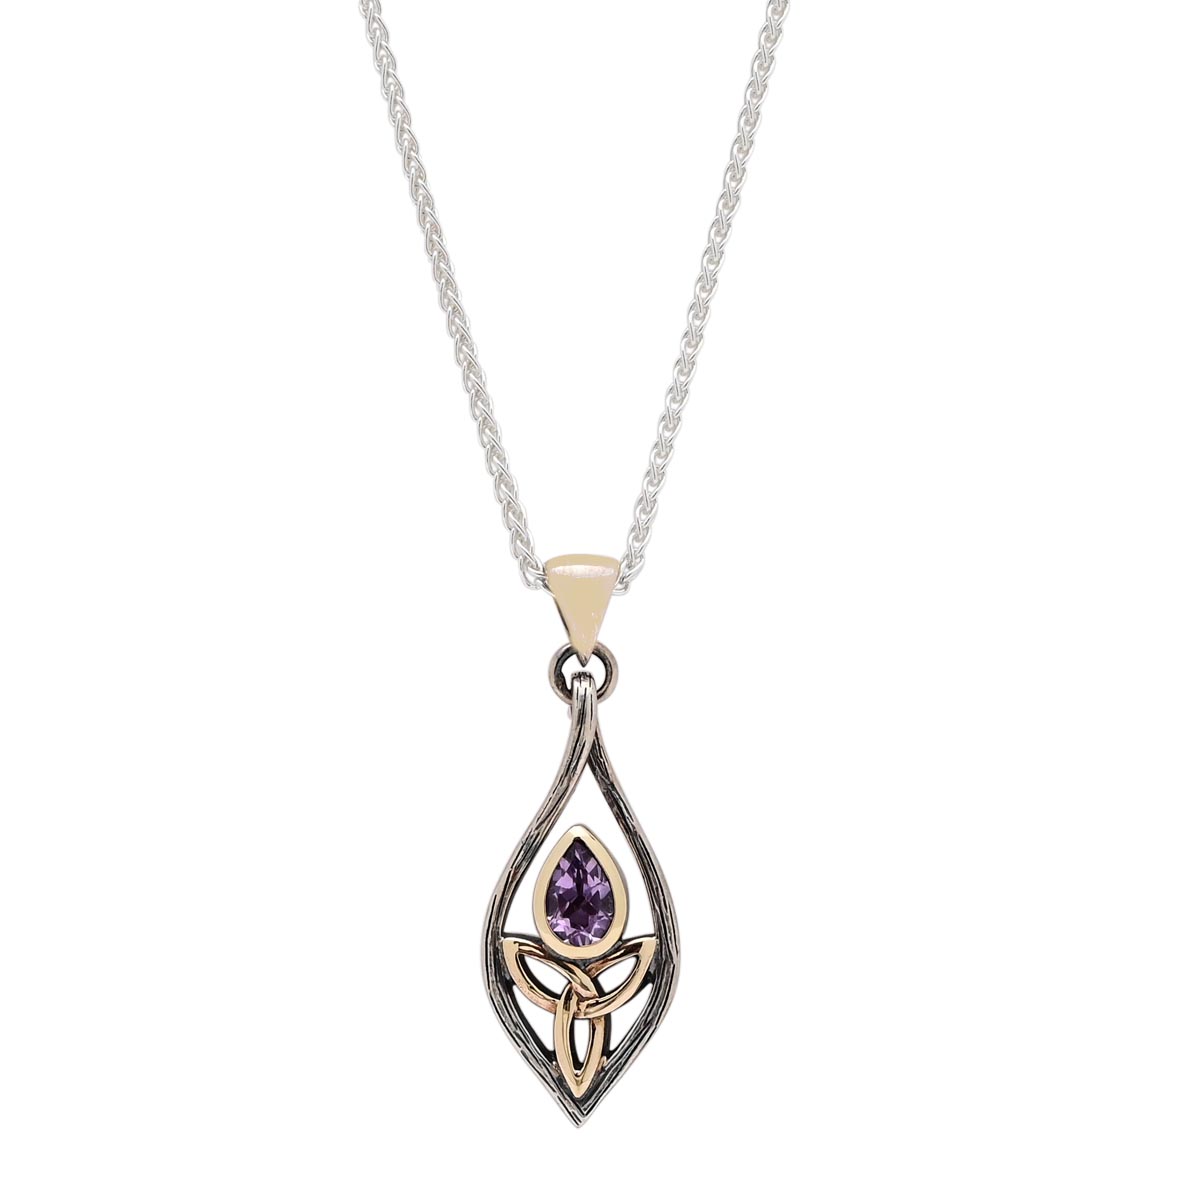 Keith Jack Amethyst Guardian Angel Necklace in Sterling Silver and 10kt Yellow Gold